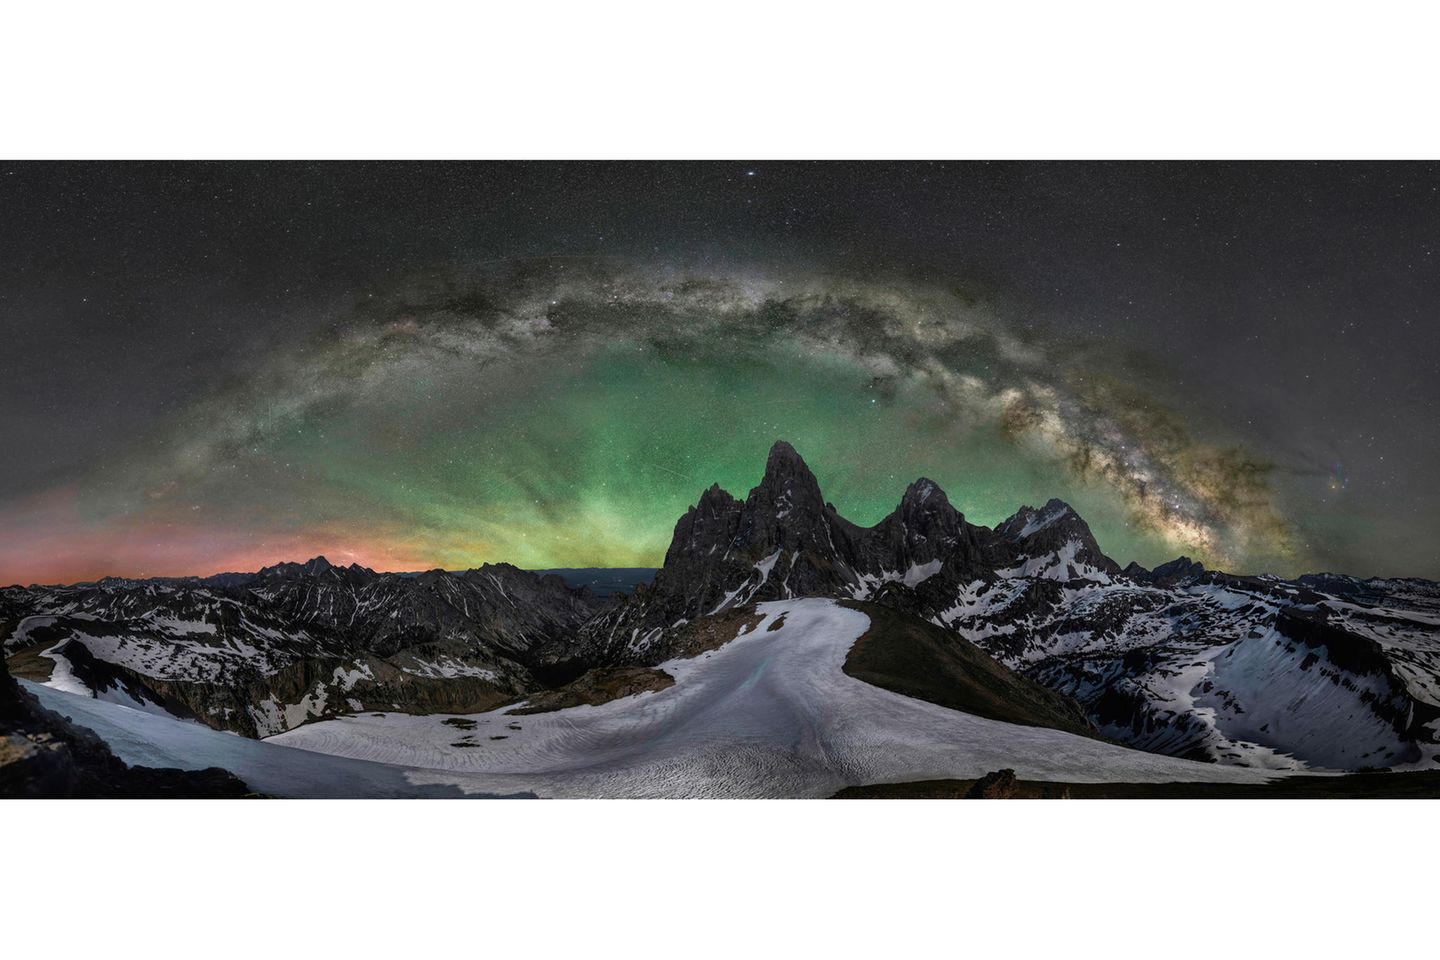 GOLD: JAKE MOSHER, USA  On June 17th, 2021, I hiked, snowshoed, and climbed to the 11,000-foot summit of Wyoming's Table Mountain to photograph the Milky Way over Grand Teton Peak. While these iconic mountains have been photographed tens of thousands of times, I wanted to show an entirely unique view of them. I was treated to one of the most spectacular displays of airglow that I've ever seen - similar to the aurora and created by photo-charged particles, but spanning much of the horizon.